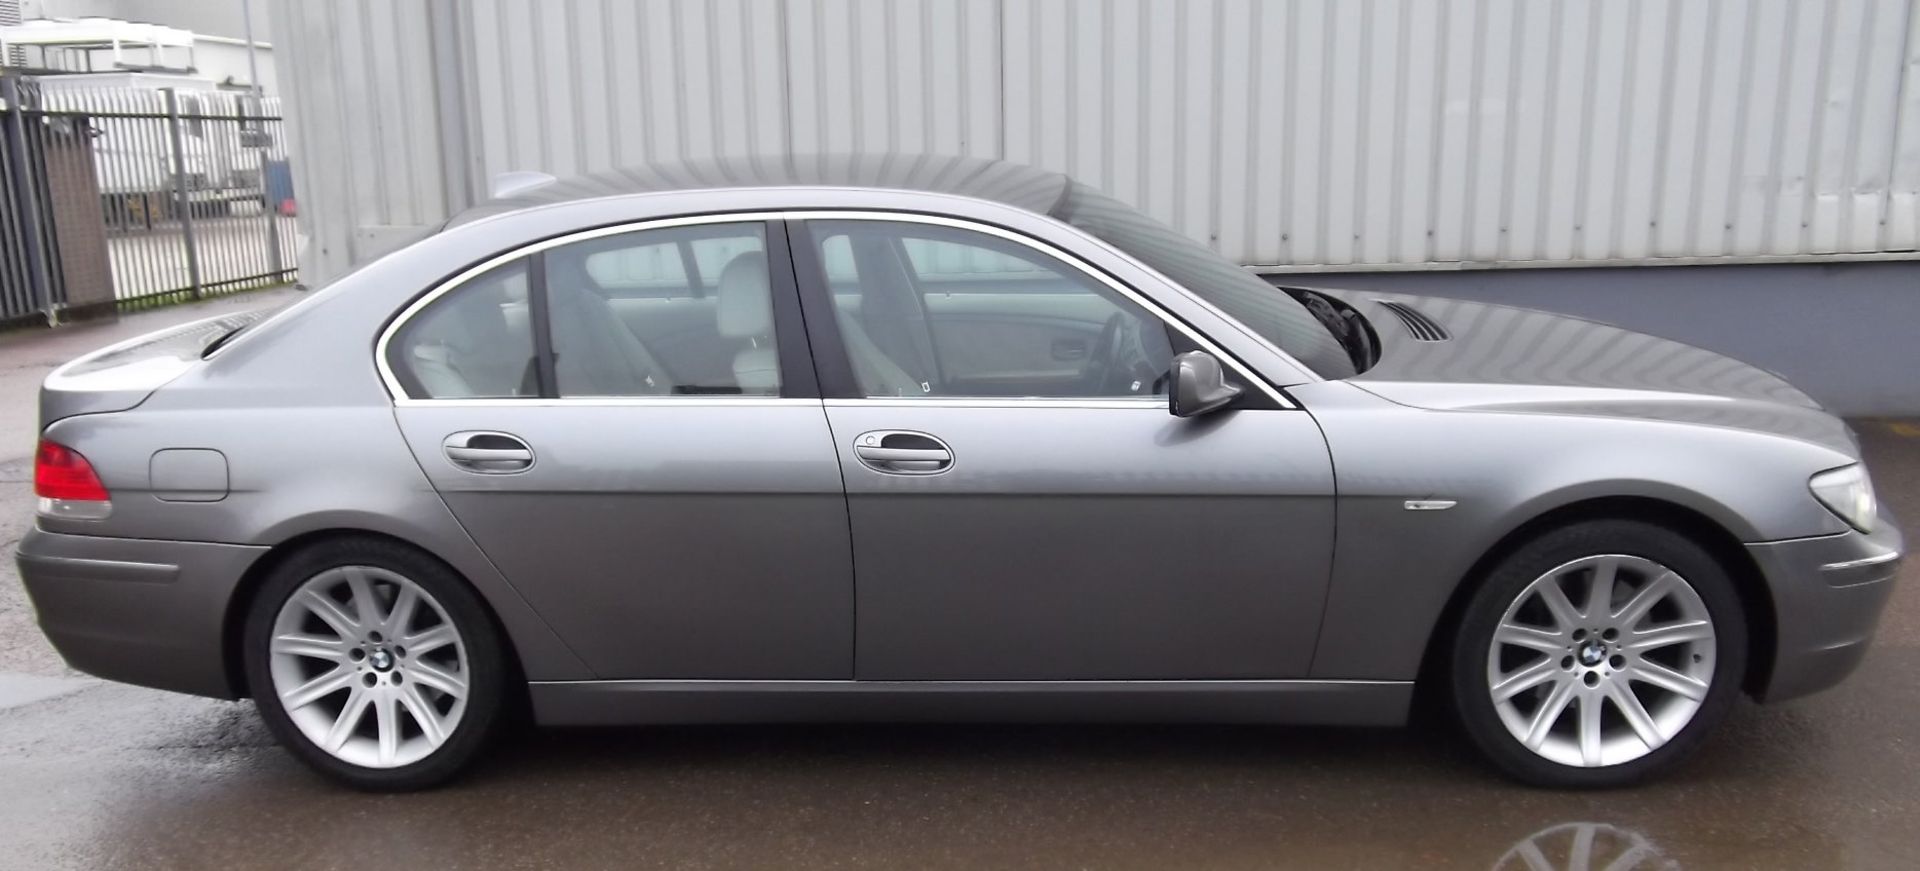 2006 BMW 730D Se Auto 4 Door Saloon - CL505 - NO VAT ON THE HAMMER - Location: Corby, - Image 24 of 25